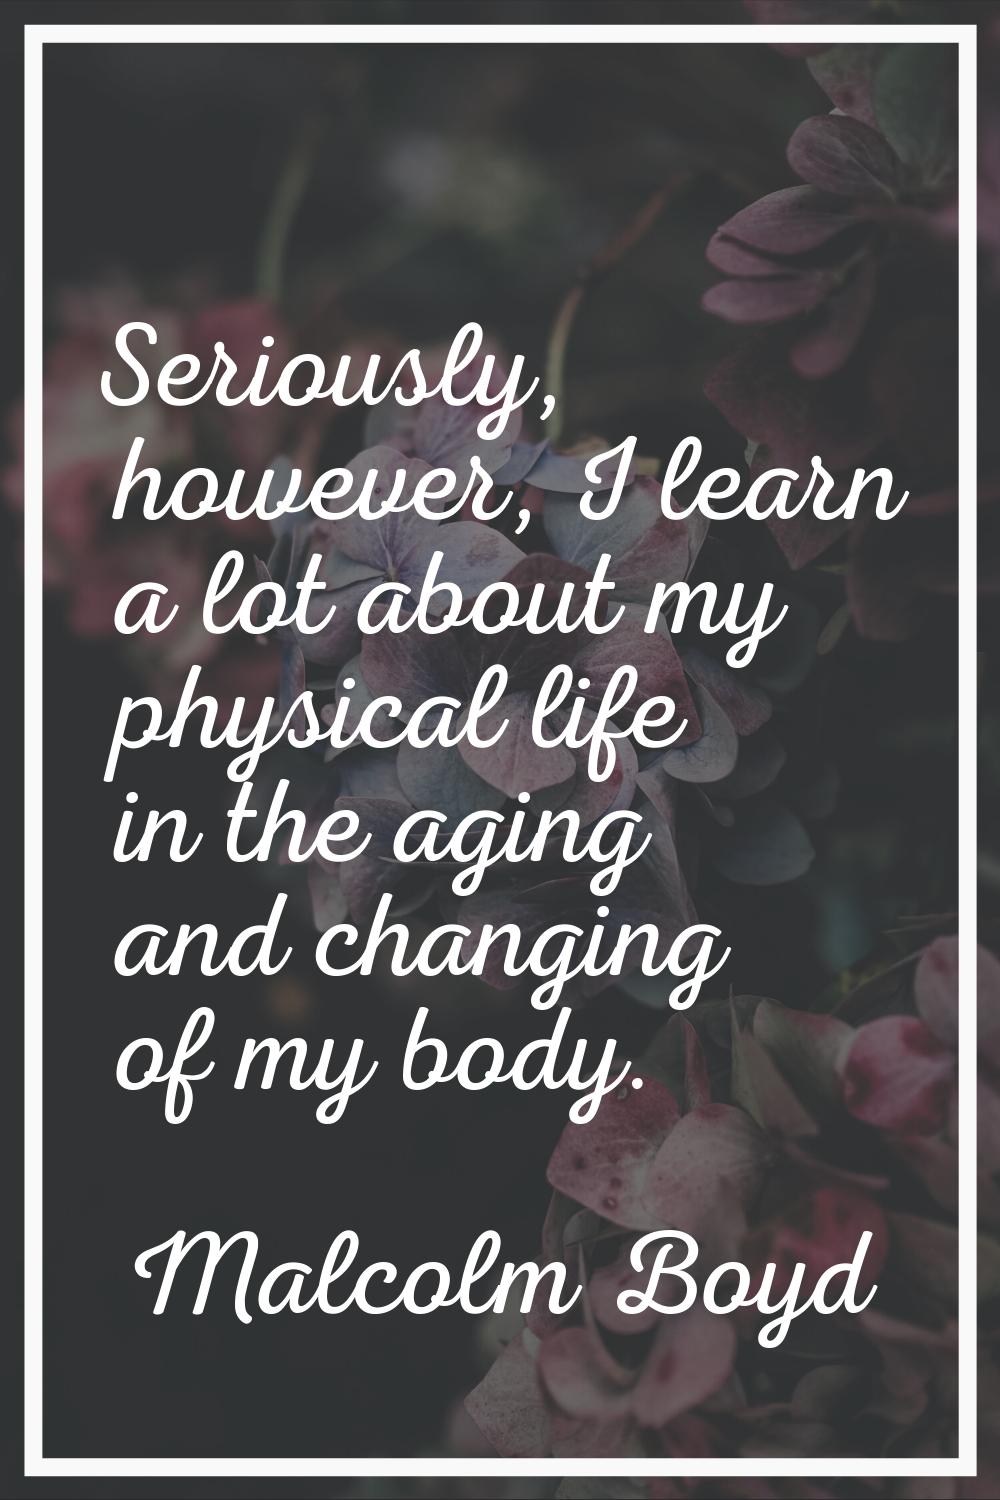 Seriously, however, I learn a lot about my physical life in the aging and changing of my body.